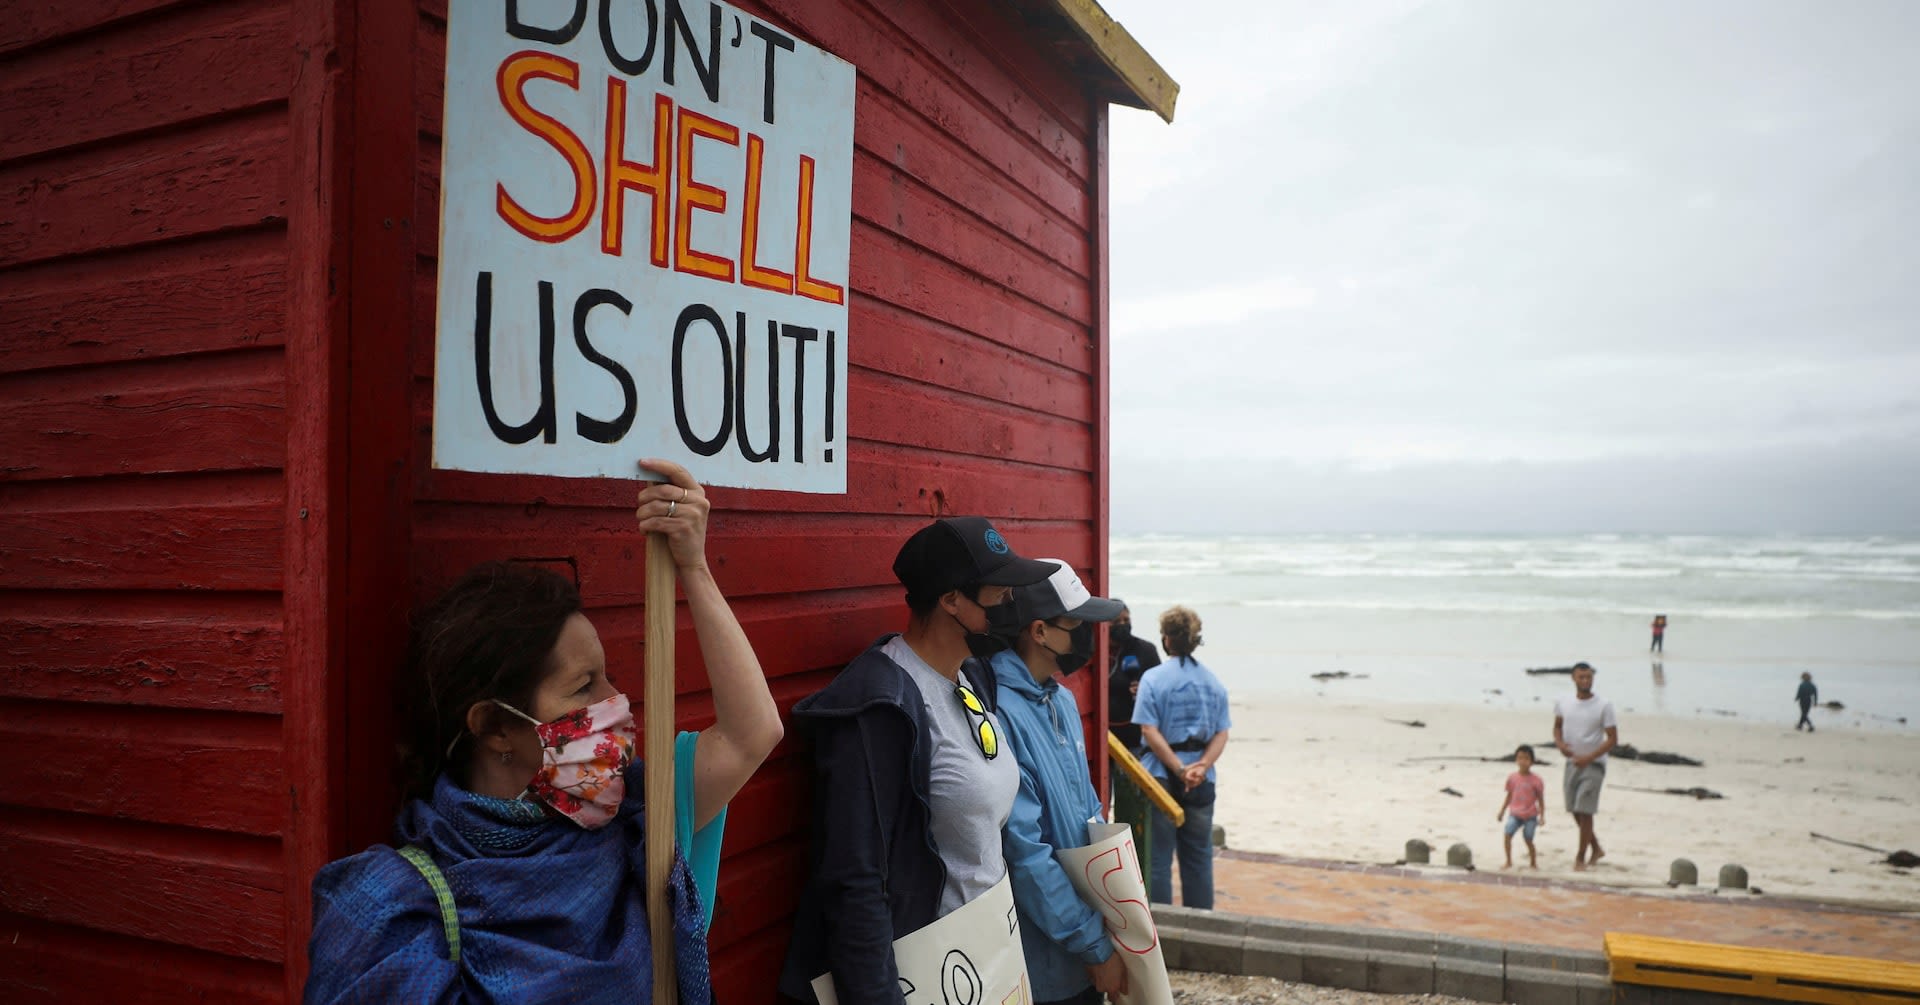 Shell to exit South Africa's downstream businesses